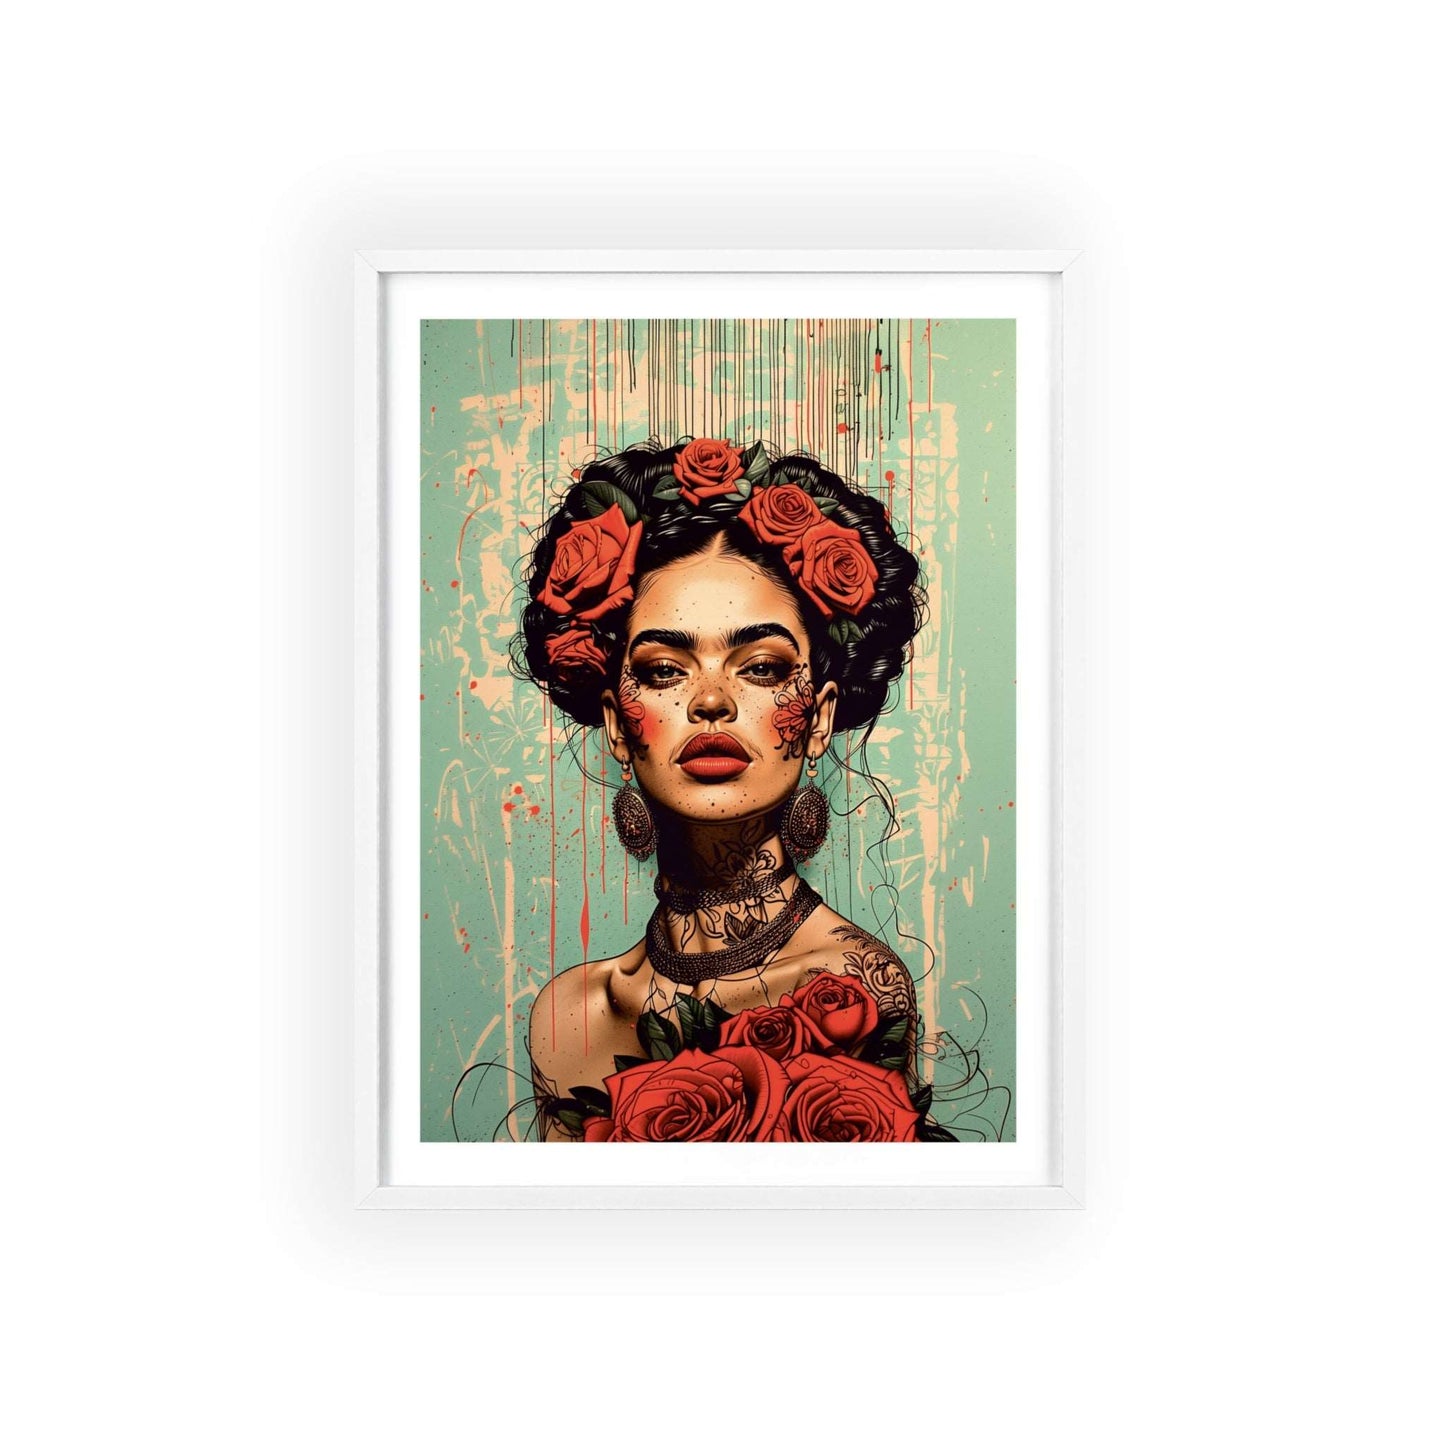 Must-Have Frida Kahlo Wall Art! Vibrant & modern portrait adds a touch of elegance. Shop now!